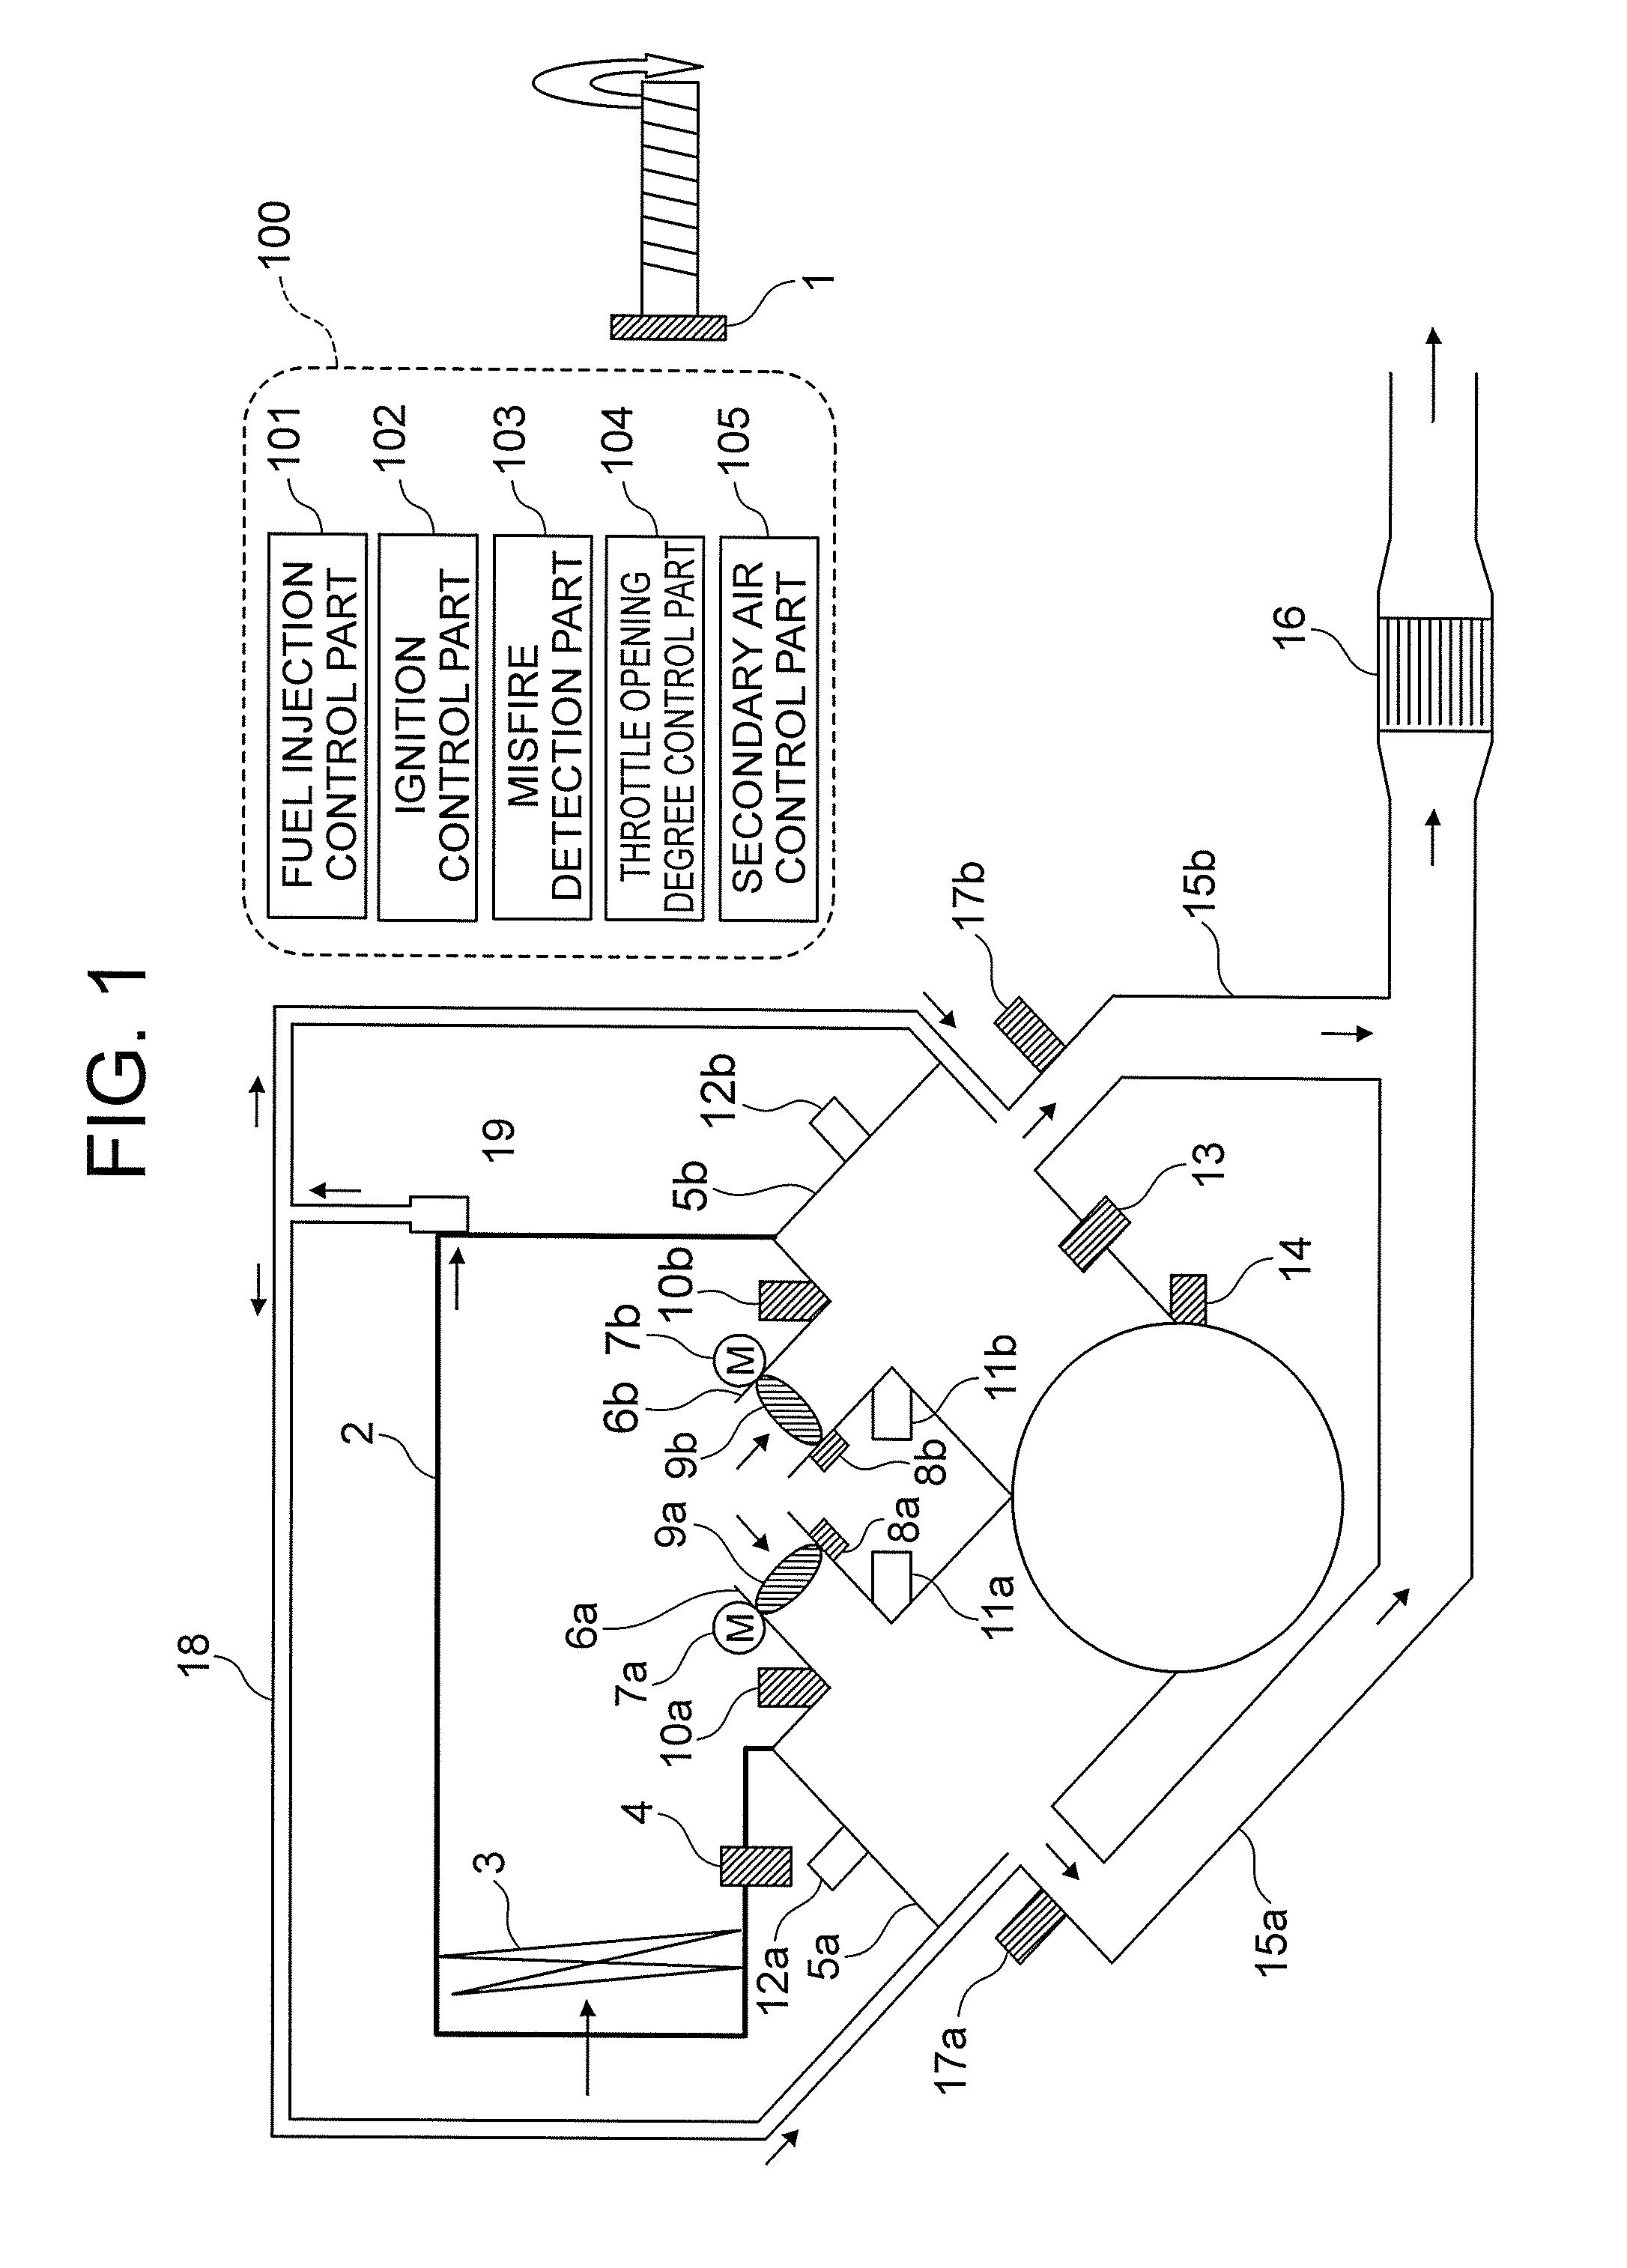 Misfire detection apparatus and misfire detection method for an internal combustion engine